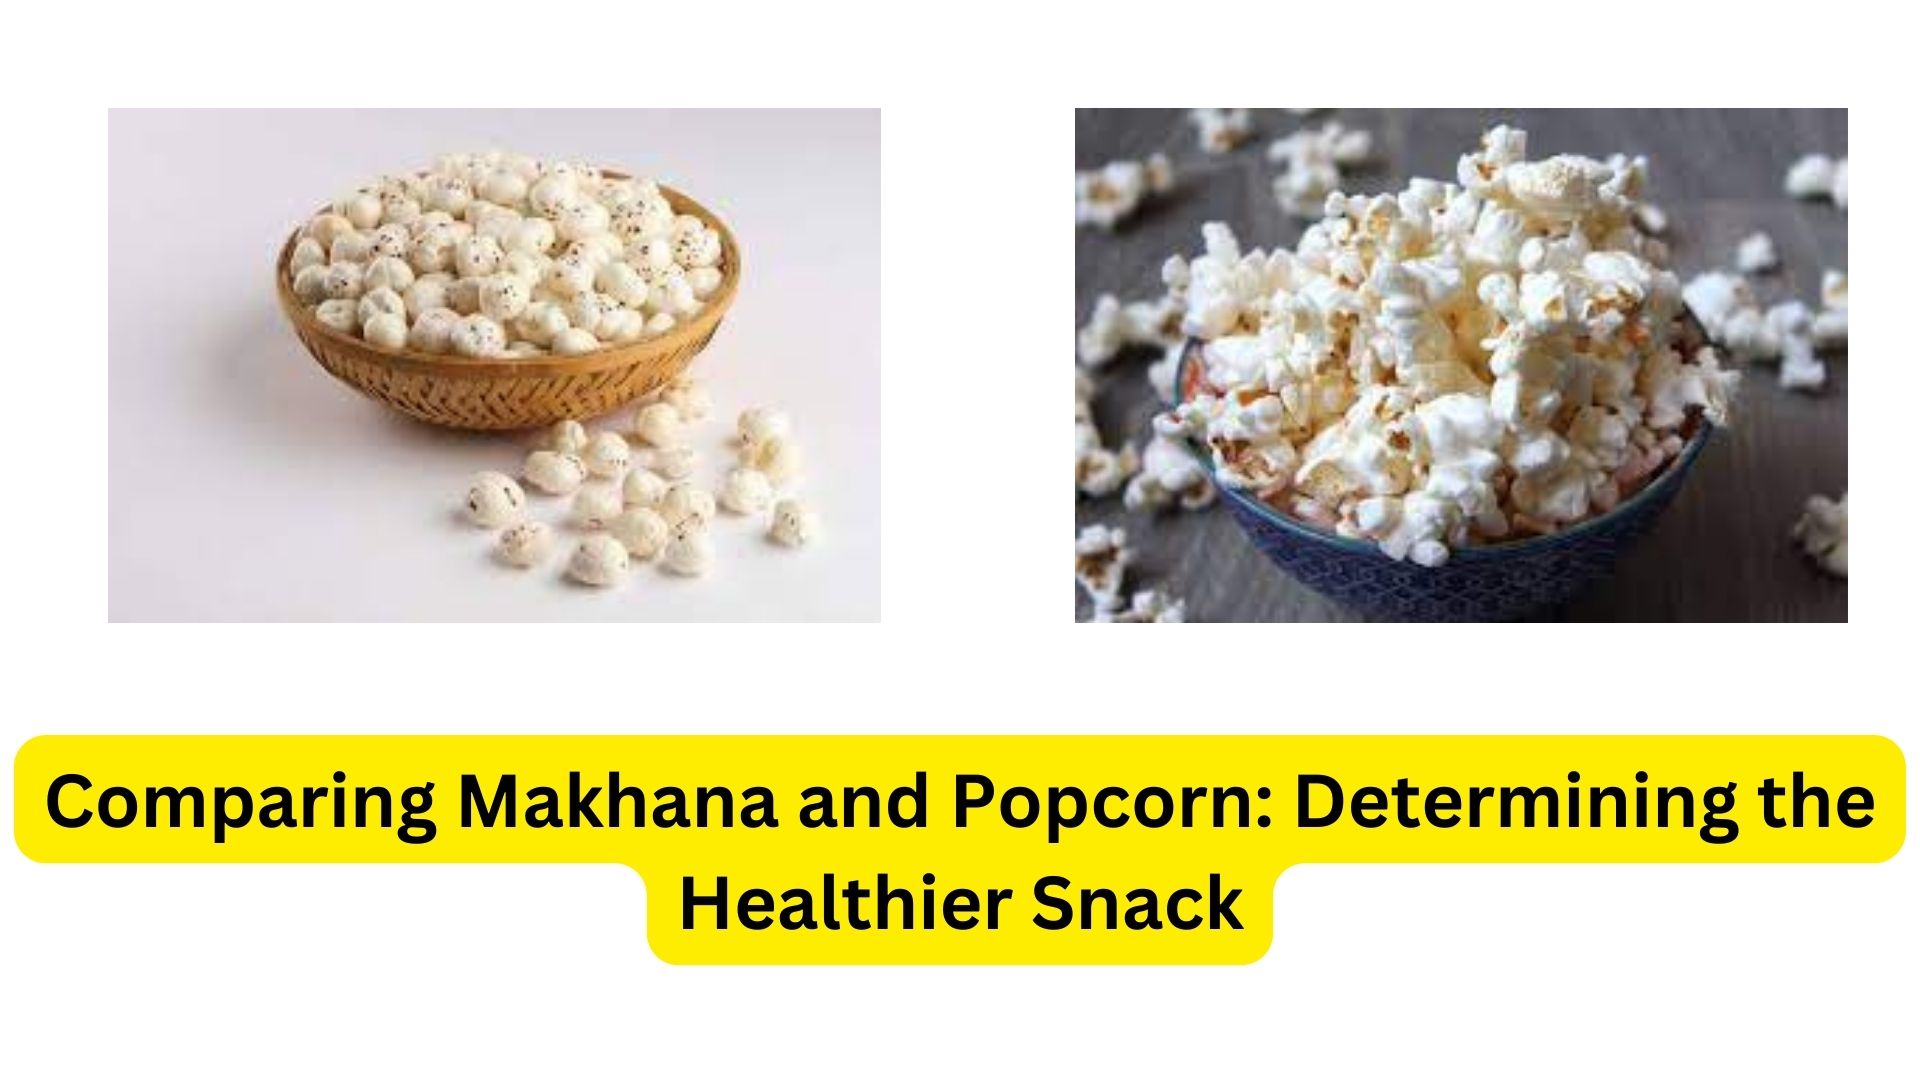 Comparing Makhana and Popcorn: Determining the Healthier Snack